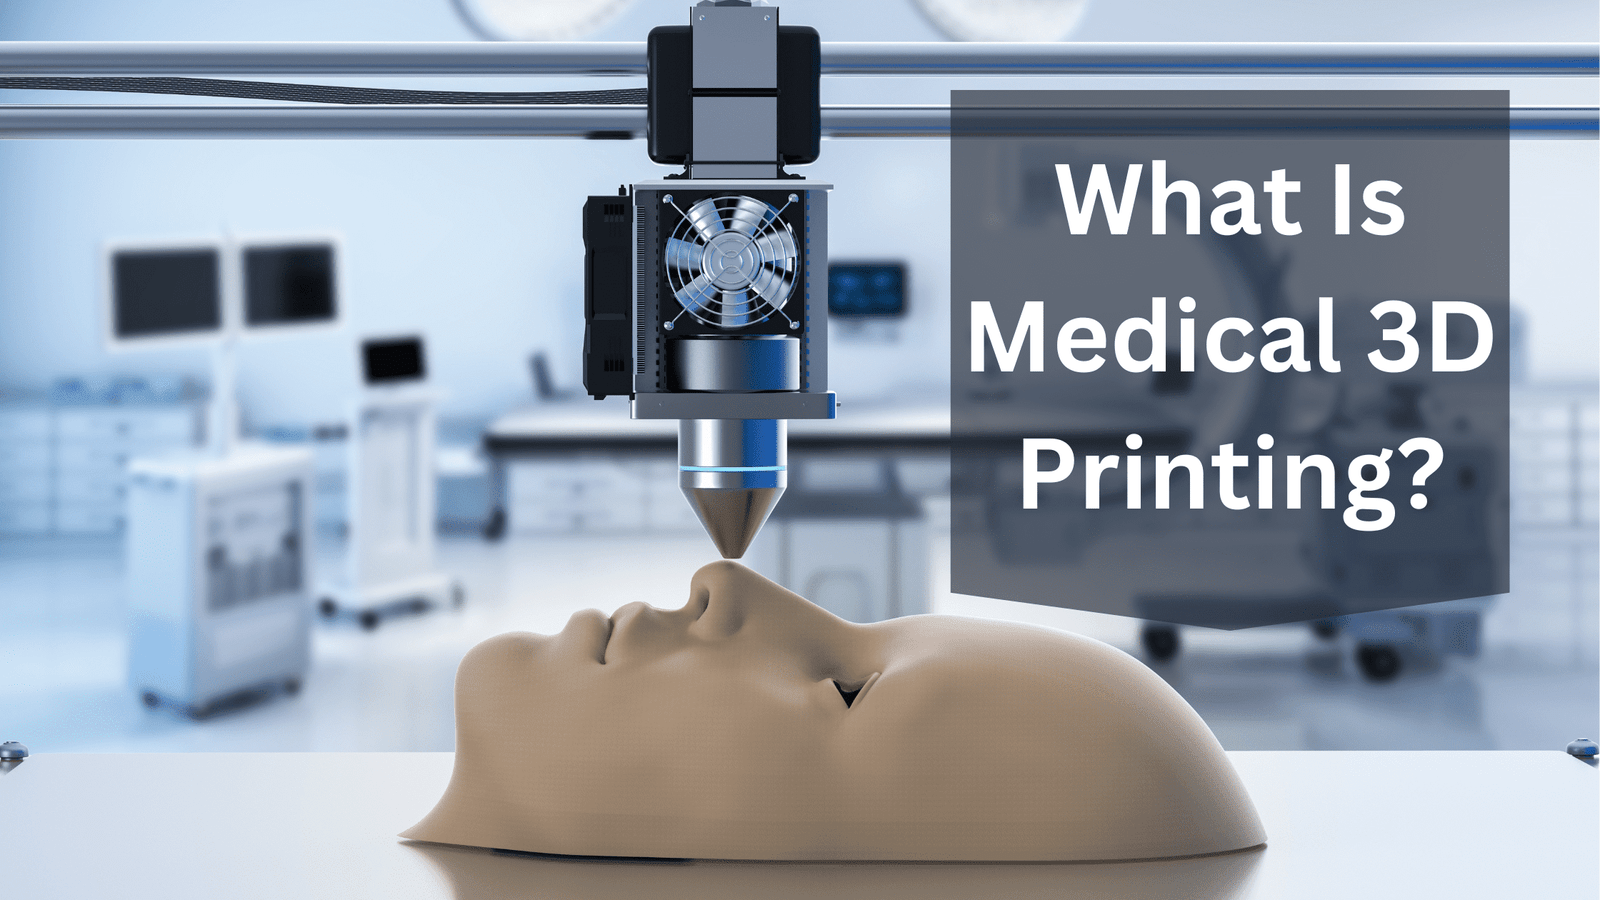 What Is Medical 3D Printing?